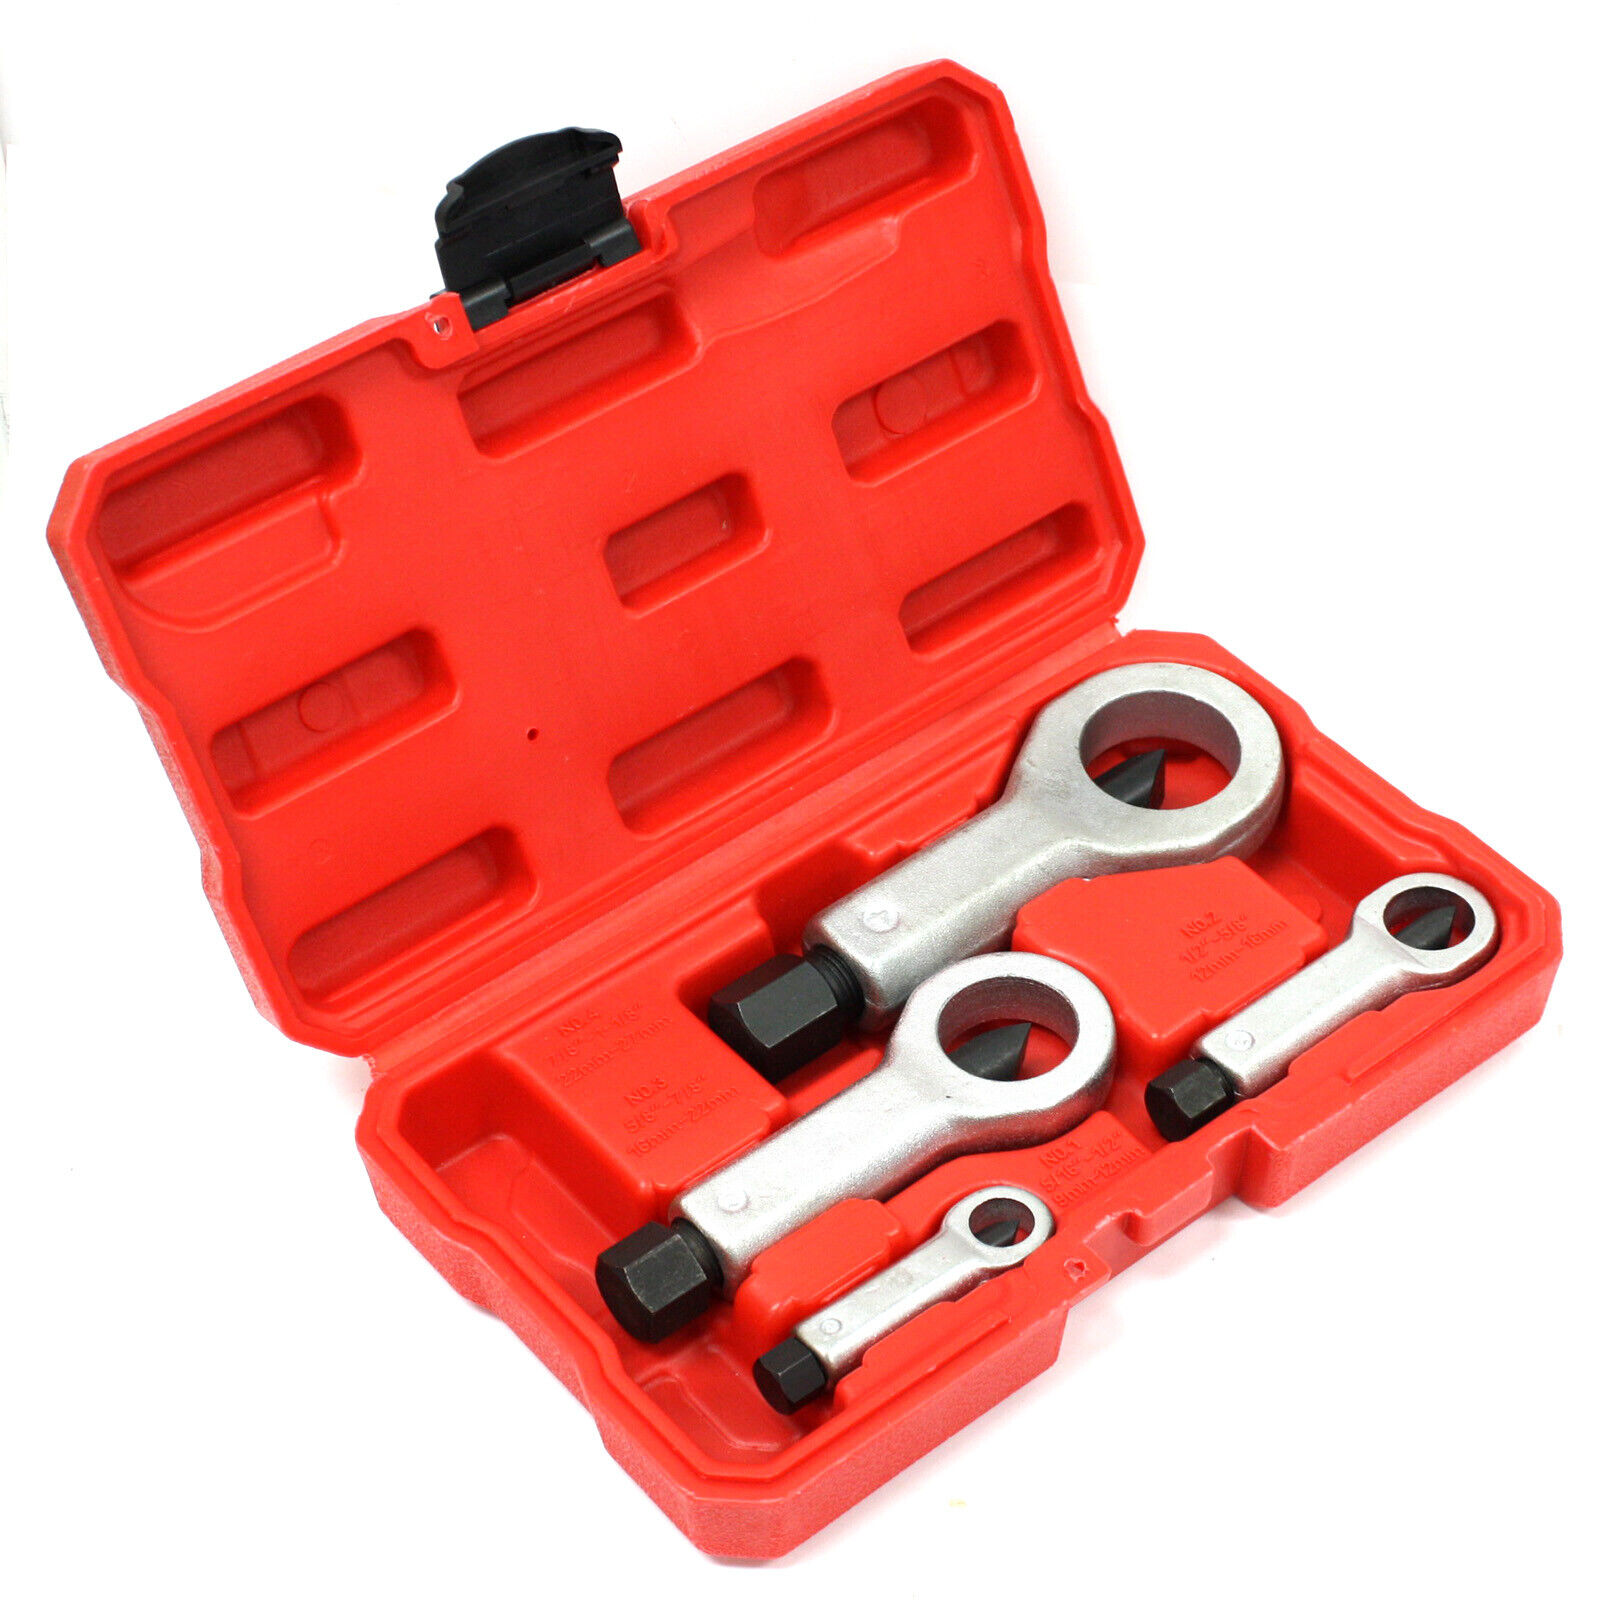 Infinity 4pc Nut Splitter Seized Damaged Broken Bolt Nuts Cutter Remover 9mm to 27mm